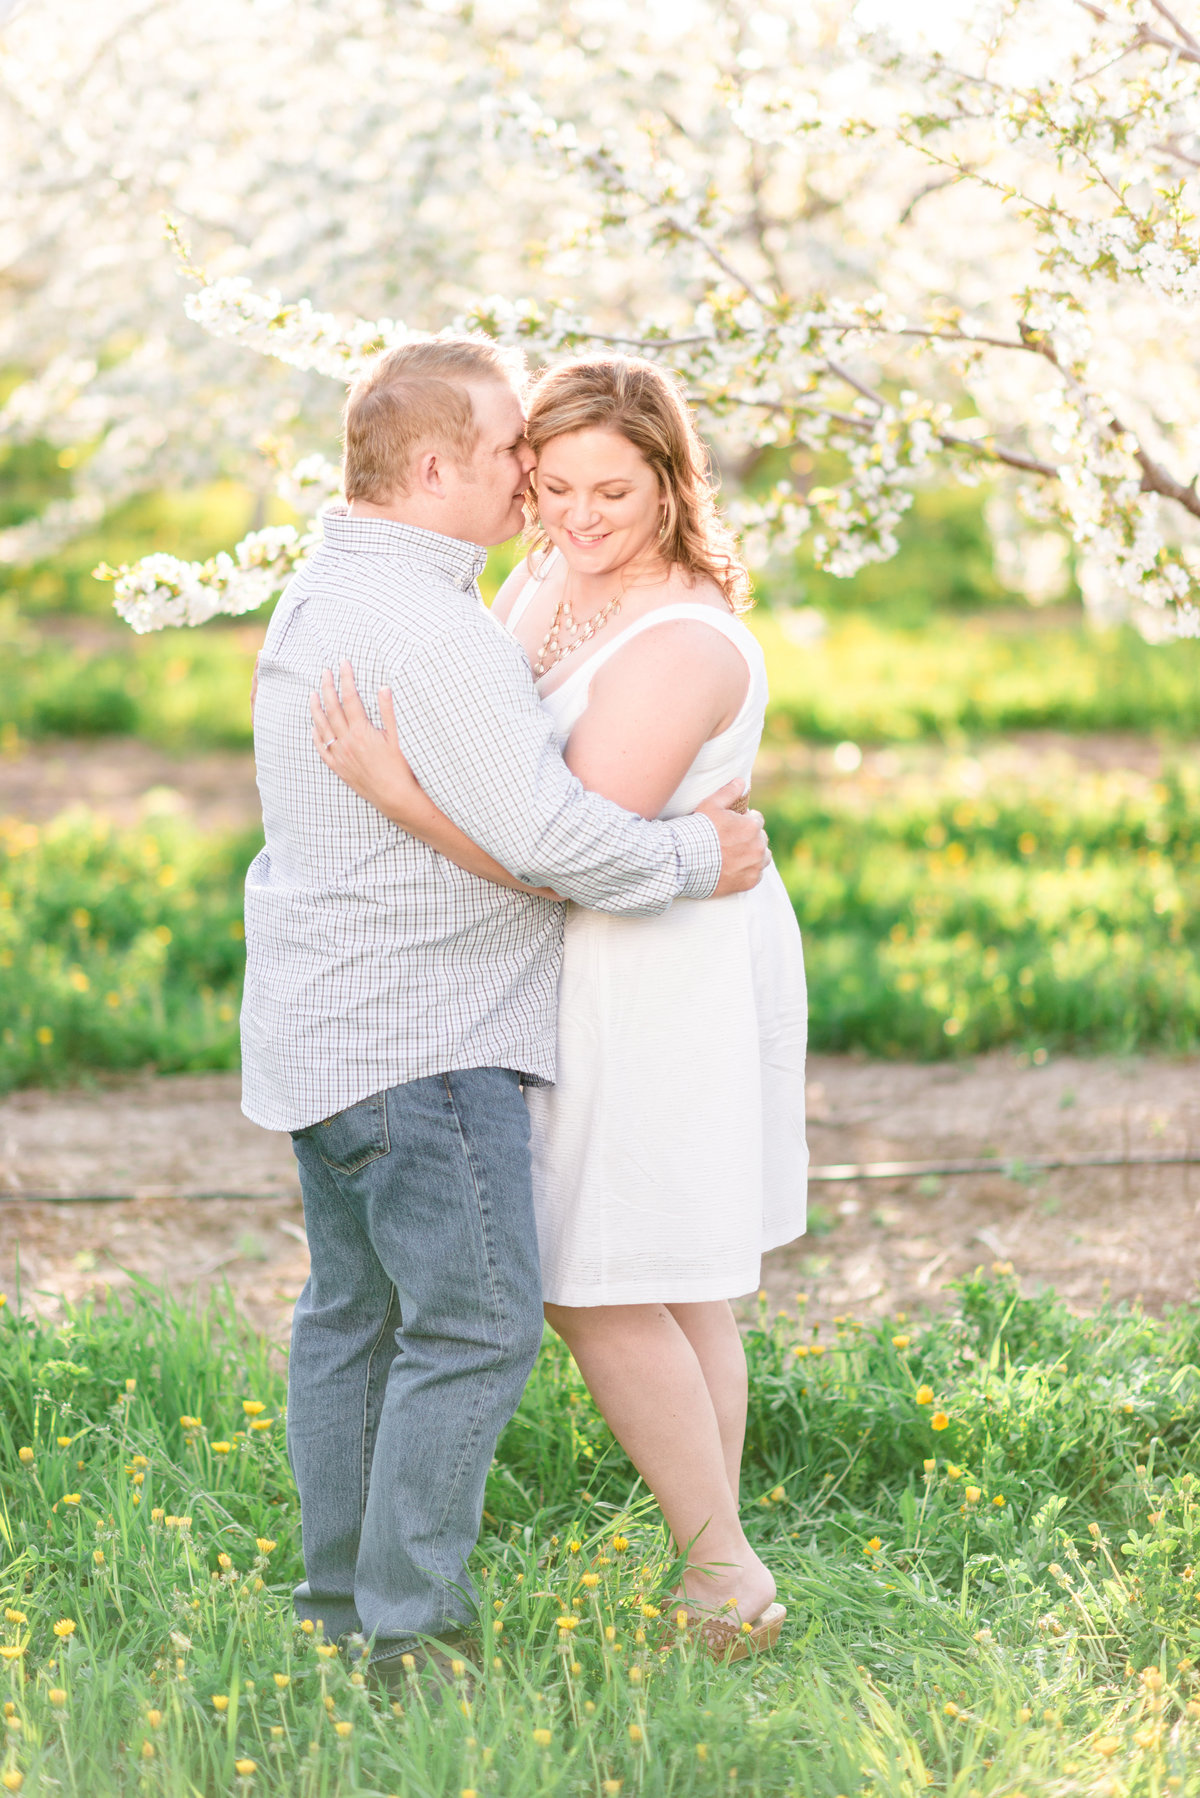 cherry blossom orchard engagement pictures in northern michigan